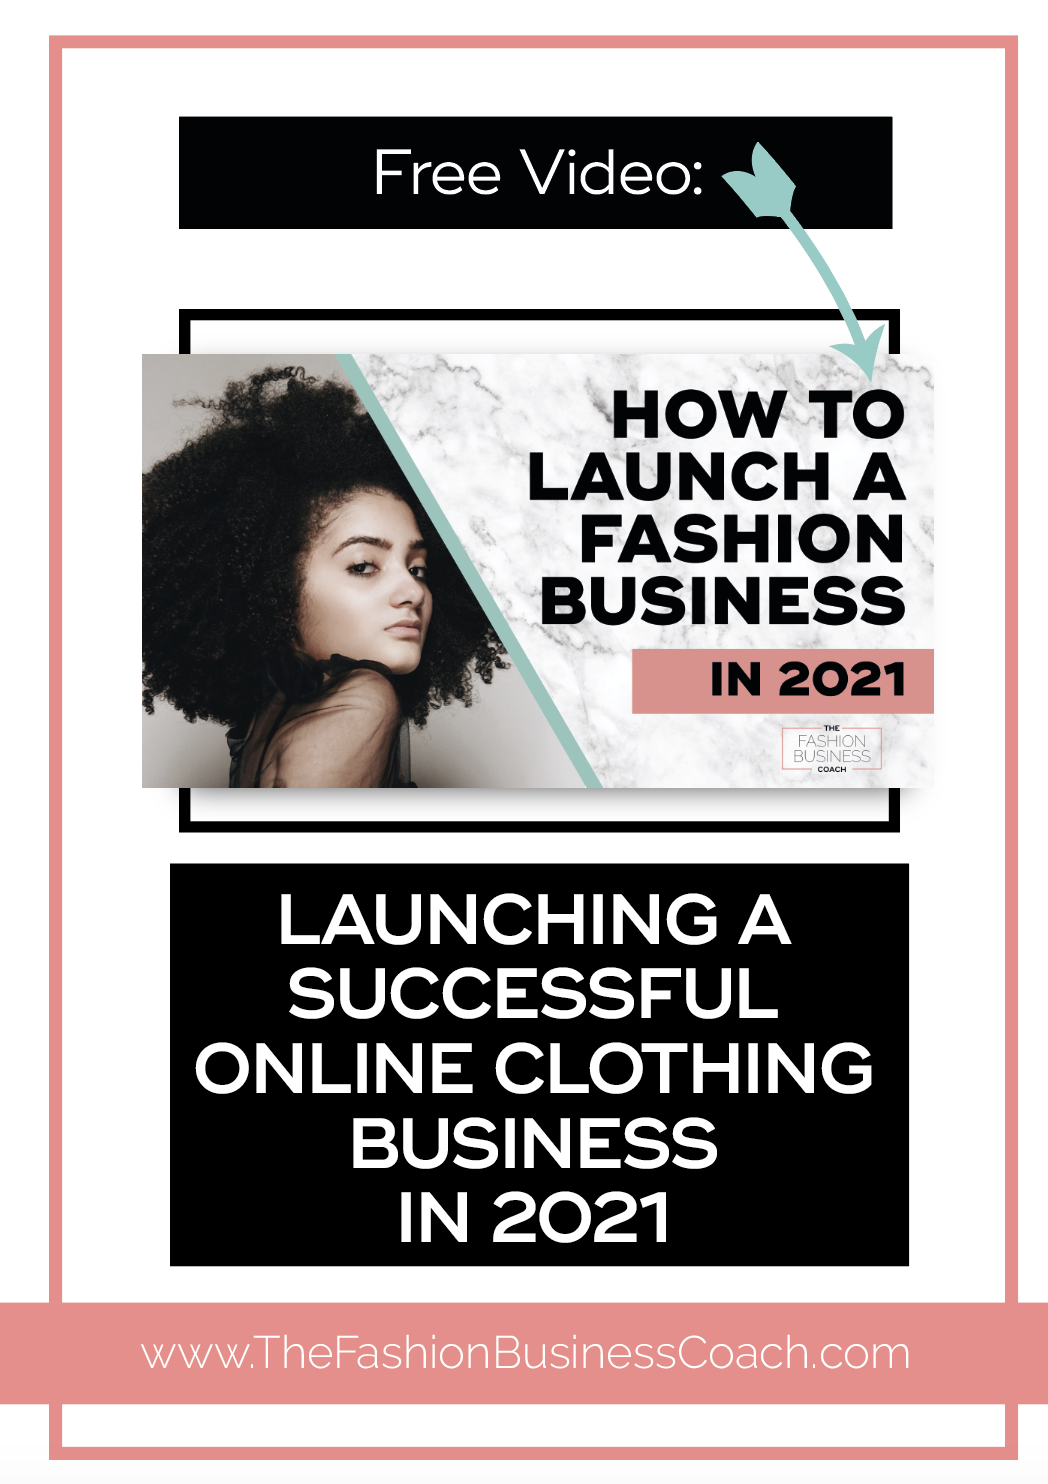 Launching a Successful Online Clothing Business in 2021 4.png